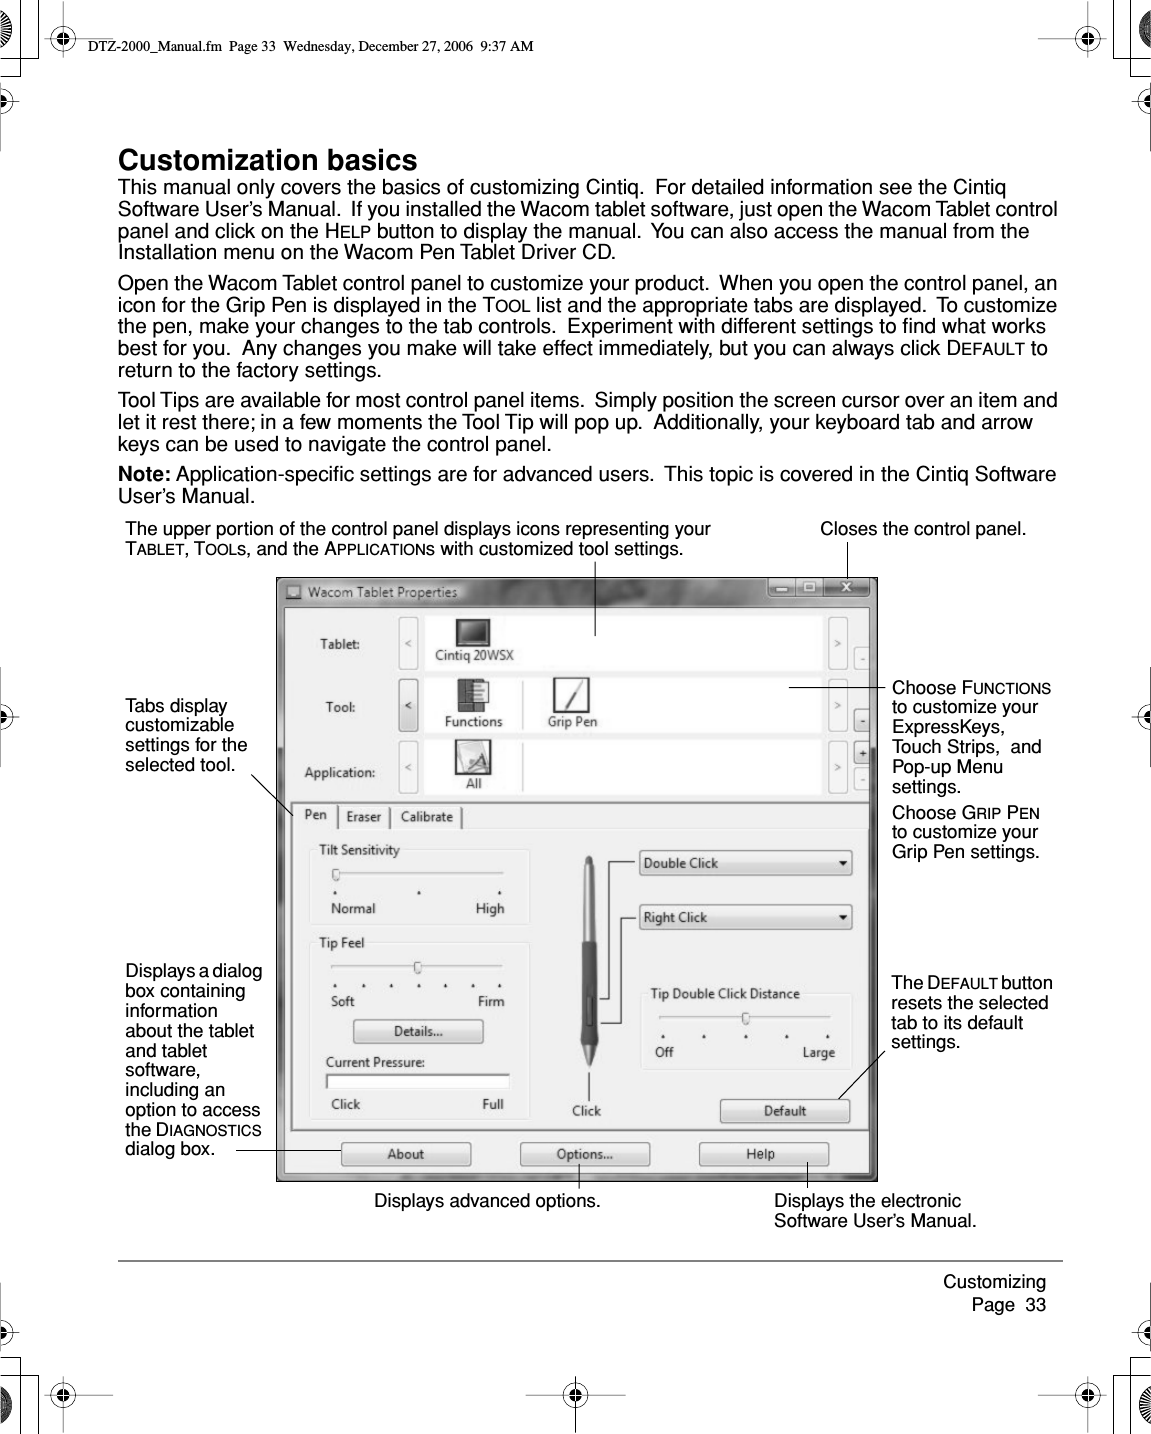 Customizing     Page  33Customization basicsThis manual only covers the basics of customizing Cintiq.  For detailed information see the Cintiq Software User’s Manual.  If you installed the Wacom tablet software, just open the Wacom Tablet control panel and click on the HELP button to display the manual.  You can also access the manual from the Installation menu on the Wacom Pen Tablet Driver CD.Open the Wacom Tablet control panel to customize your product.  When you open the control panel, an icon for the Grip Pen is displayed in the TOOL list and the appropriate tabs are displayed.  To customize the pen, make your changes to the tab controls.  Experiment with different settings to ﬁnd what works best for you.  Any changes you make will take effect immediately, but you can always click DEFAULT to return to the factory settings.Tool Tips are available for most control panel items.  Simply position the screen cursor over an item and let it rest there; in a few moments the Tool Tip will pop up.  Additionally, your keyboard tab and arrow keys can be used to navigate the control panel.Note: Application-speciﬁc settings are for advanced users.  This topic is covered in the Cintiq Software User’s Manual.Displays the electronic Software User’s Manual.Closes the control panel.Displays a dialog box containing information about the tablet and tablet software, including an option to access the DIAGNOSTICS dialog box.Choose FUNCTIONS to customize your ExpressKeys, Touch Strips,  and Pop-up Menu settings.Choose GRIP PEN to customize your Grip Pen settings.The upper portion of the control panel displays icons representing your TABLET, TOOLs, and the APPLICATIONs with customized tool settings.Tabs display customizable settings for the selected tool.Displays advanced options.The DEFAULT button resets the selected tab to its default settings.DTZ-2000_Manual.fm  Page 33  Wednesday, December 27, 2006  9:37 AM